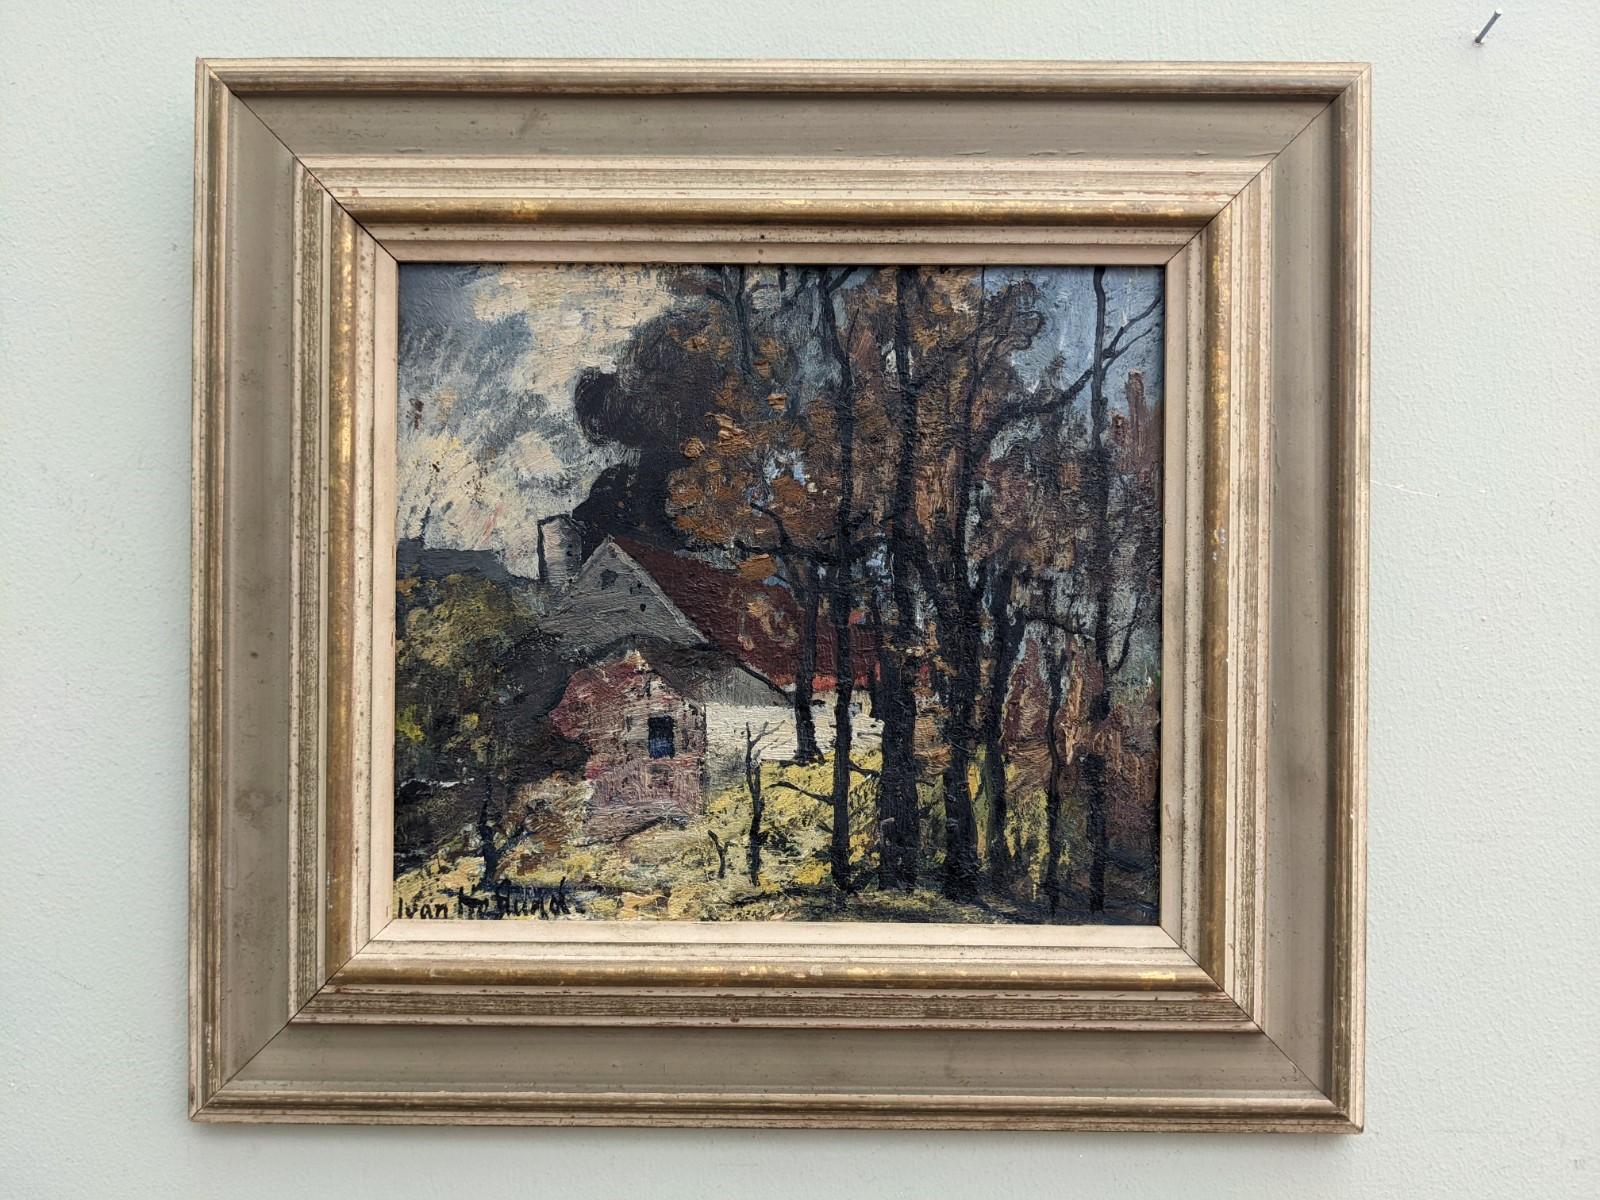 Vintage Mid Century Landscape Framed Swedish Oil Painting -Cottage in the Forest - Brown Landscape Painting by Unknown